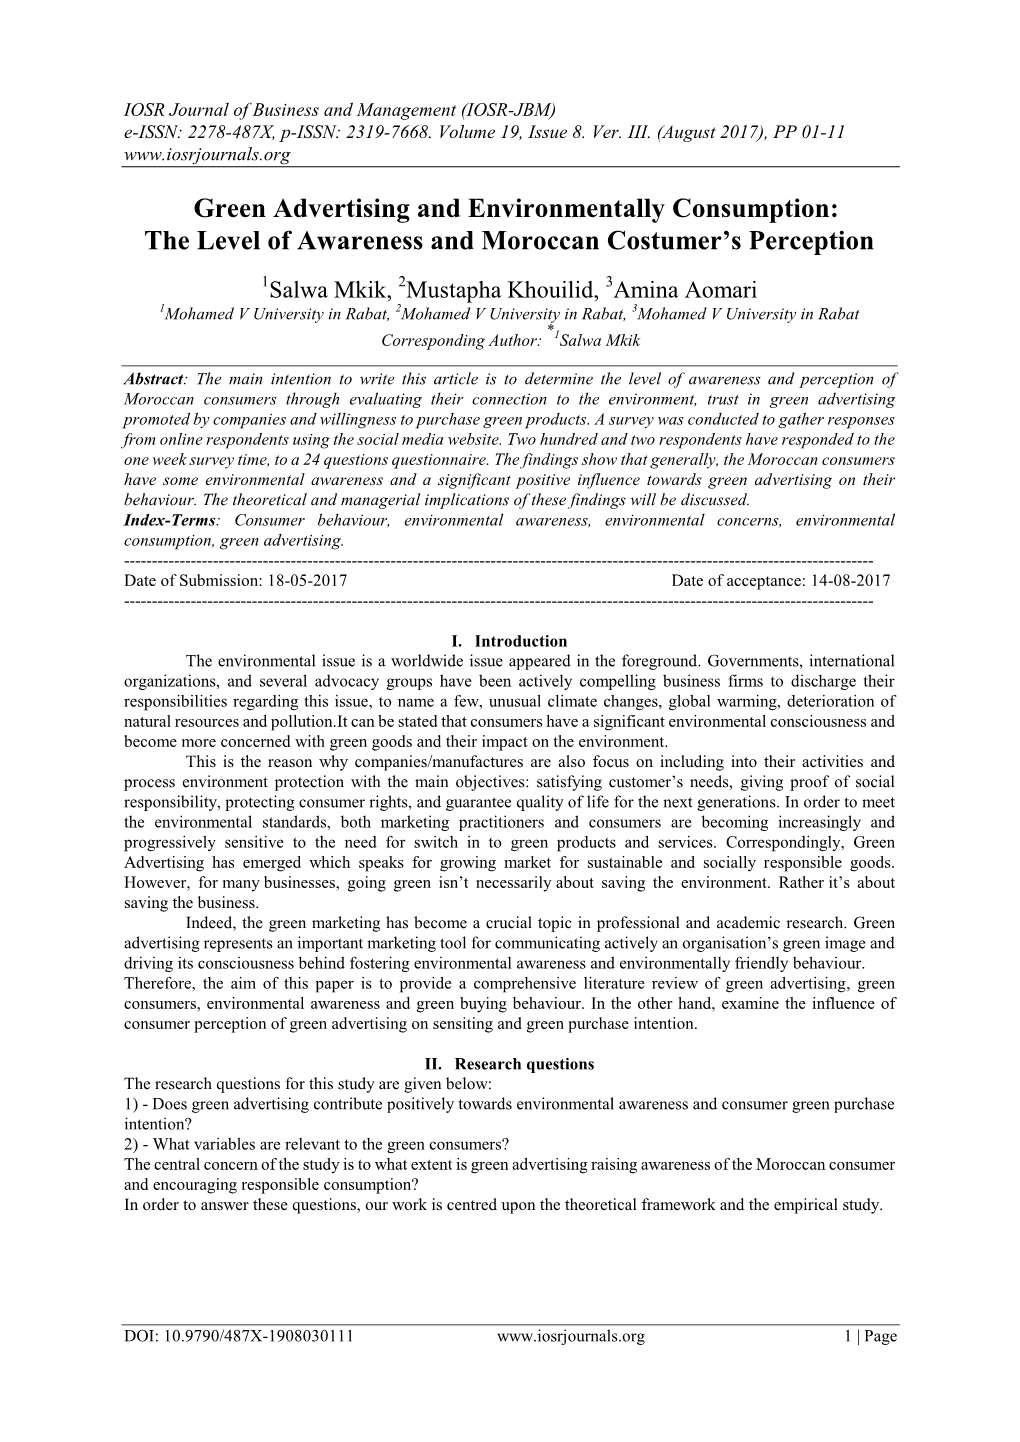 Green Advertising and Environmentally Consumption: the Level of Awareness and Moroccan Costumer’S Perception